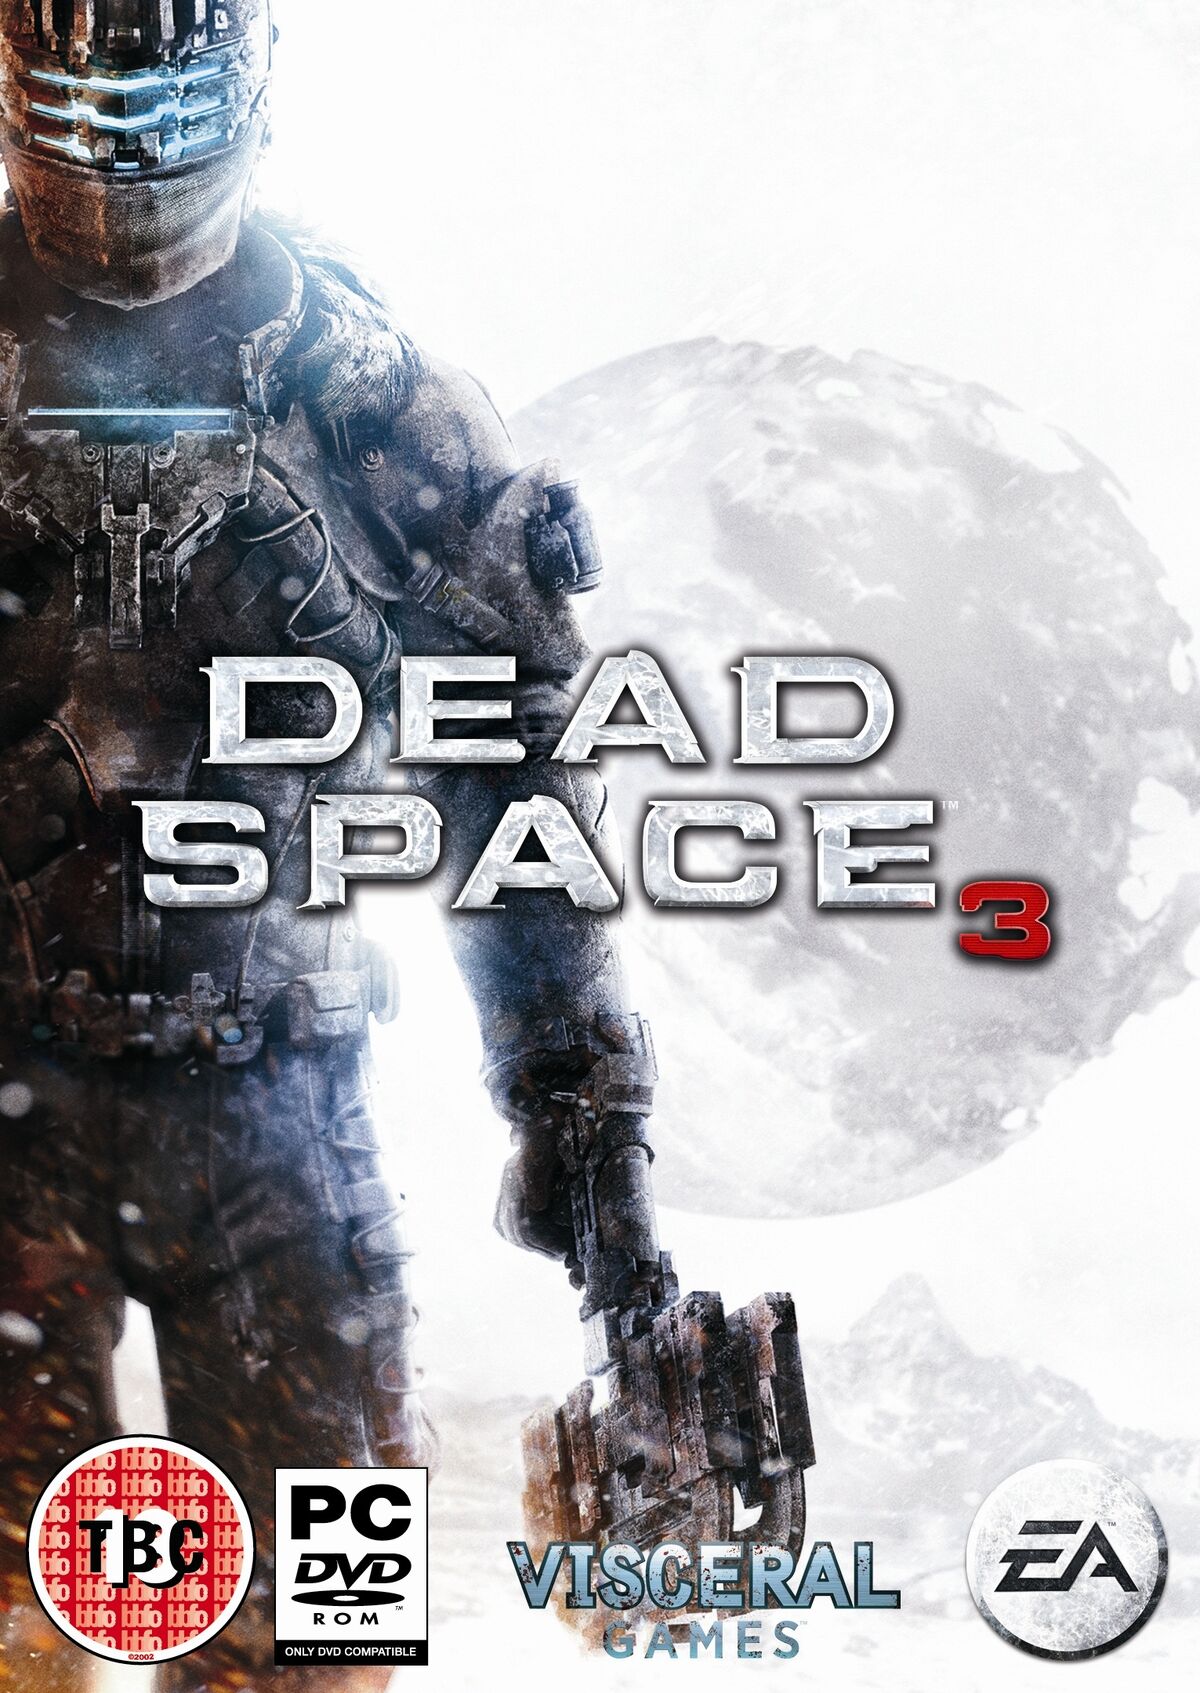 Dead Space 2 Revives Isaac Clarke - Review - The New York Times